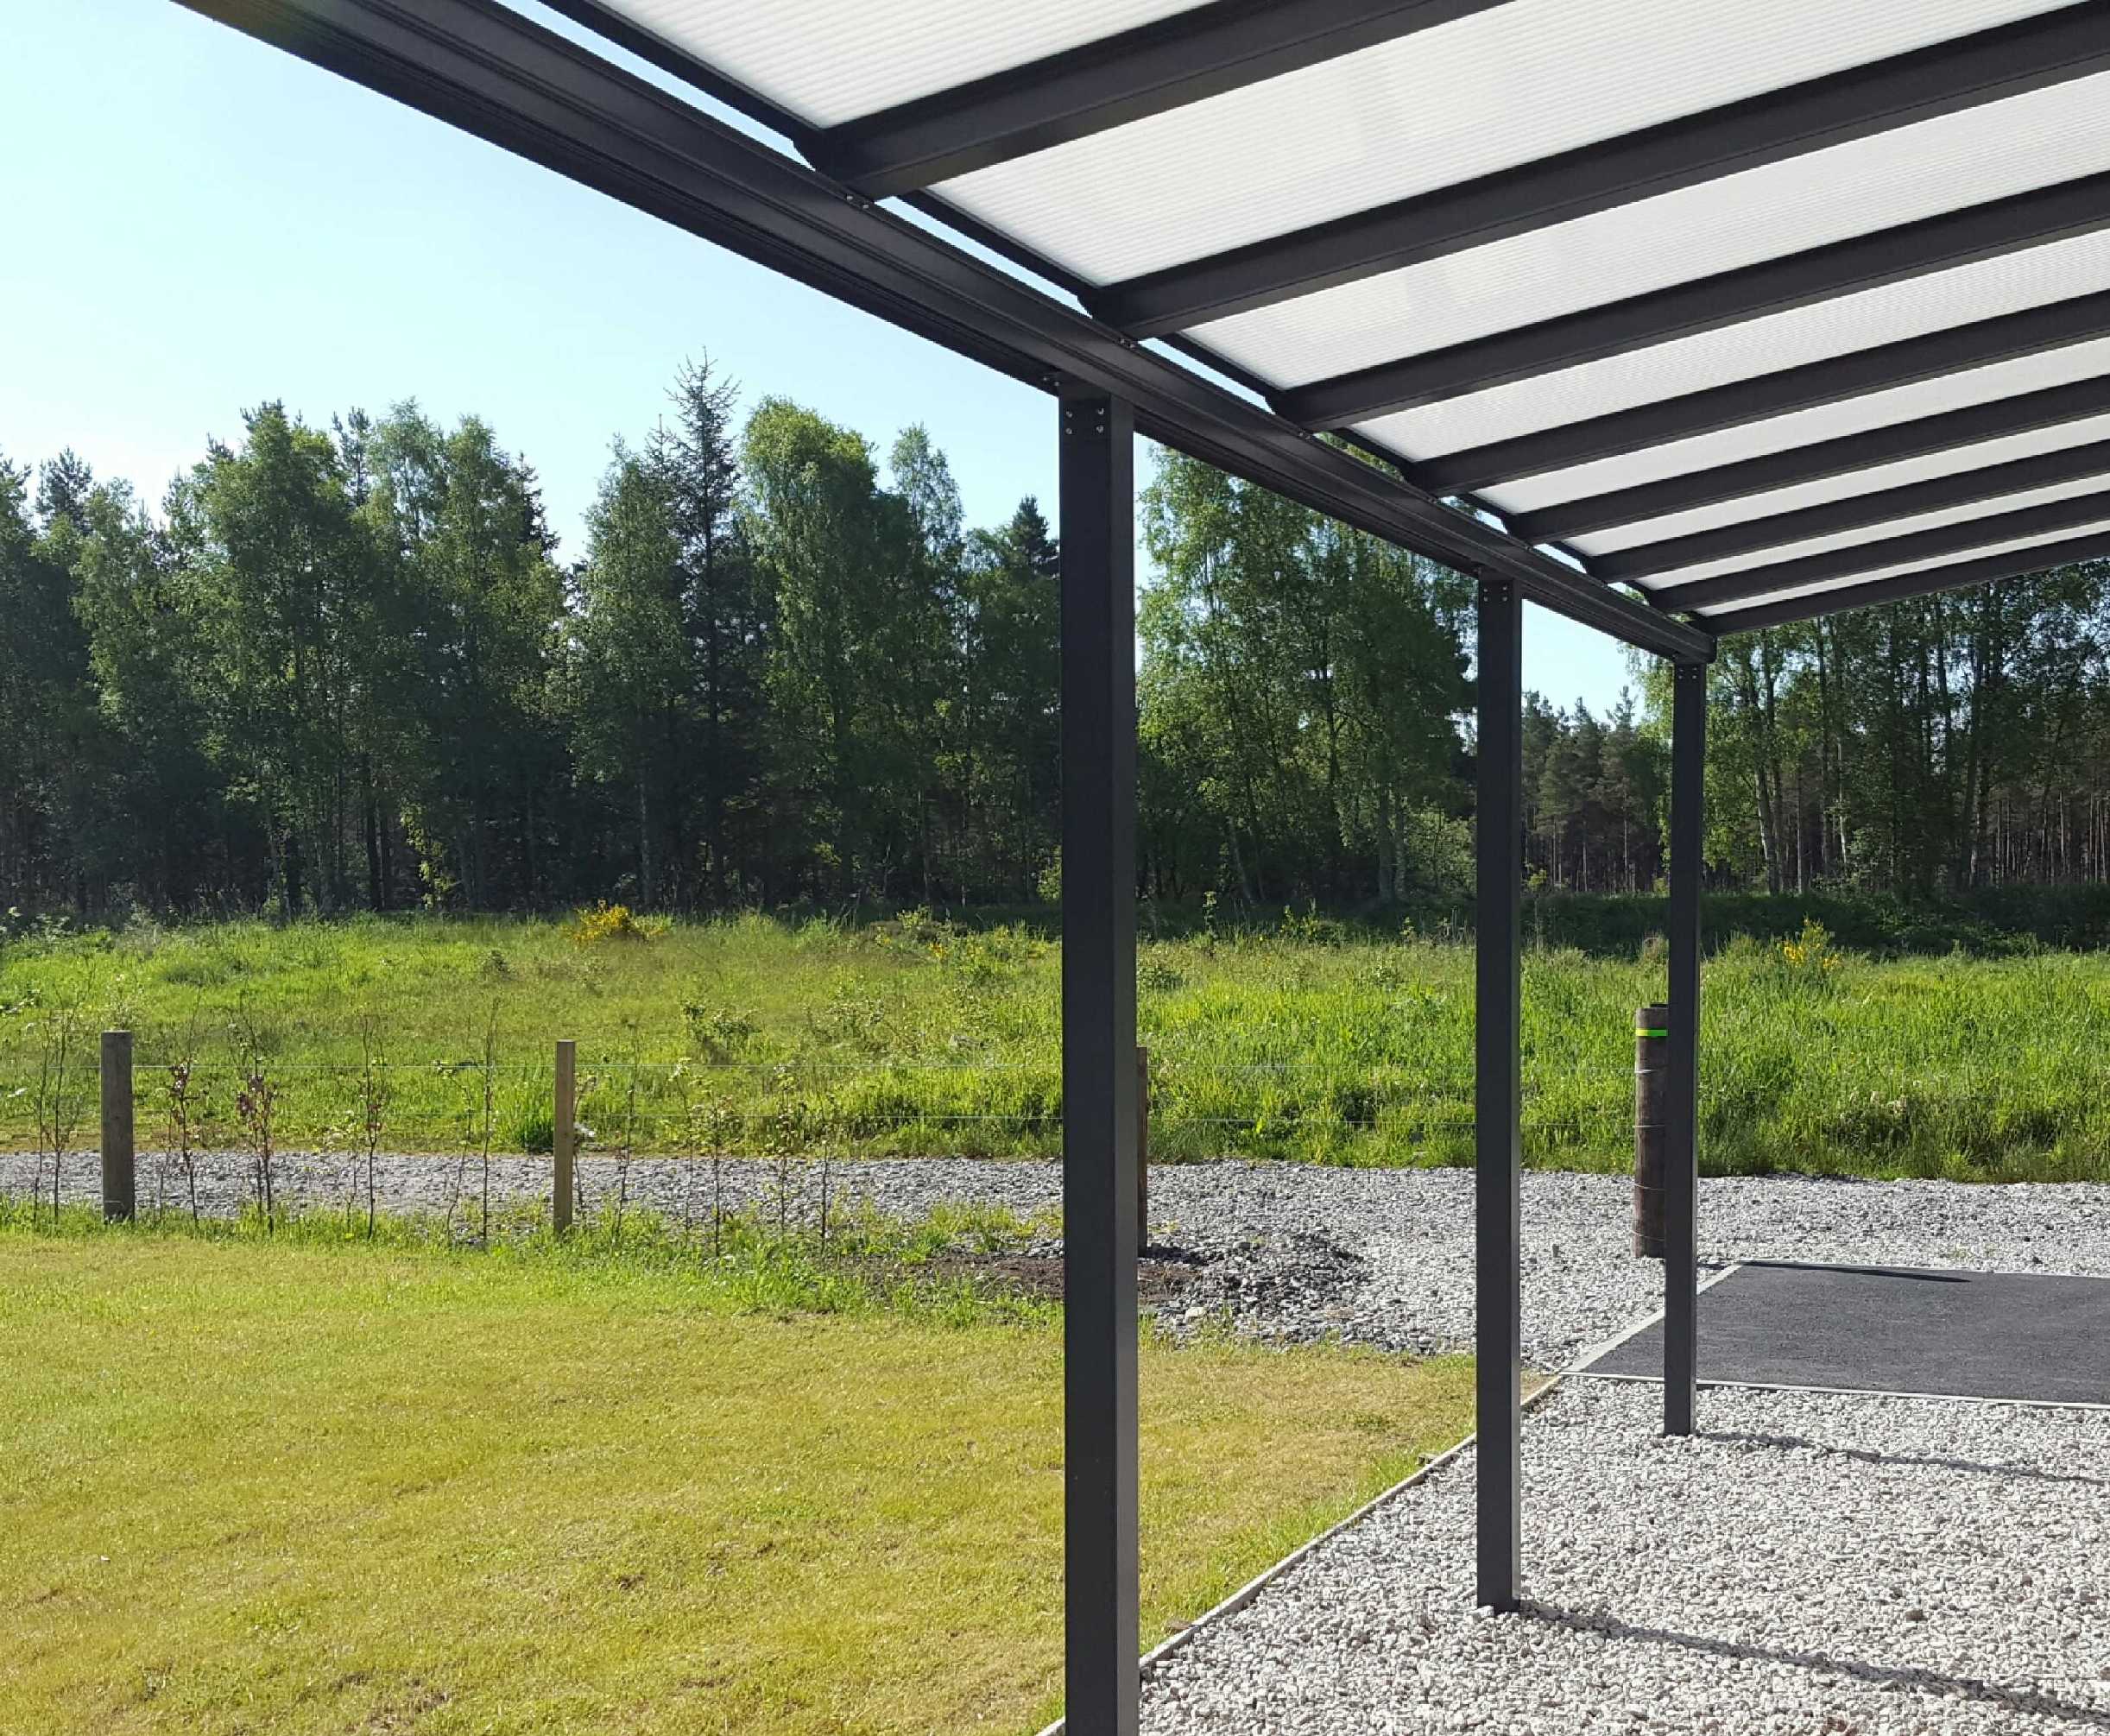 Omega Smart Lean-To Canopy, Anthracite Grey, 6mm Glass Clear Plate Polycarbonate Glazing - 8.4m (W) x 2.0m (P), (4) Supporting Posts